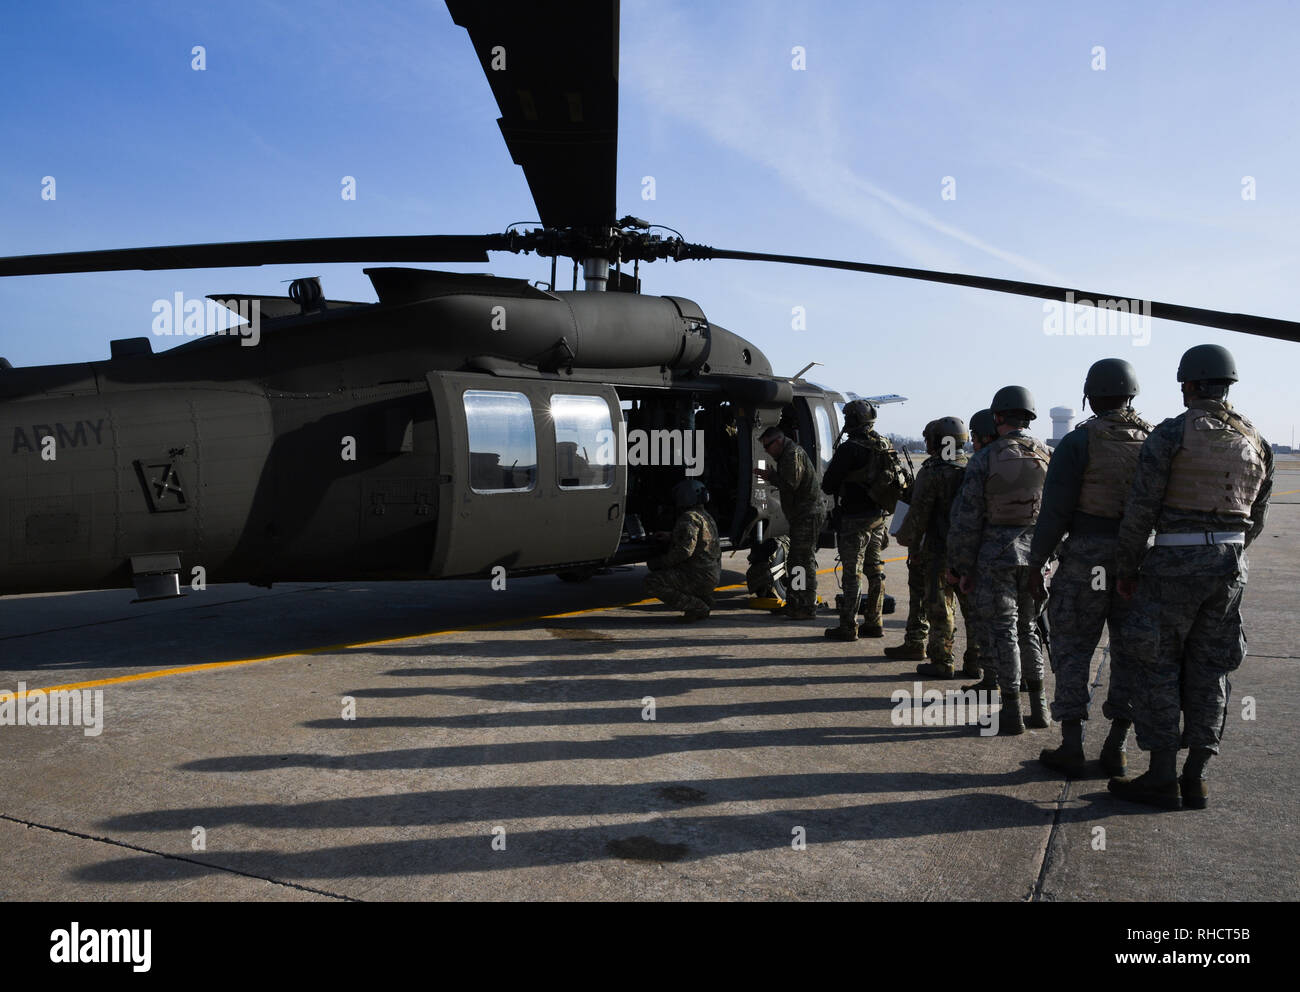 Long shadows are cast upon the flight line as members of the 137th Special Operations Wing, Oklahoma Air National Guard, line-up to board an Oklahoma Army National Guard UH-60M Blackhawk at Tinker Air Force Base, Oklahoma during SENTRY REX 19-01 exercise on Jan. 15, 2019. The training exercise allowed the special operators to be inserted in a defended landing-zone with the goal of rescuing a downed aircrew member. (U.S. Air Force photo/Greg L. Davis) Stock Photo